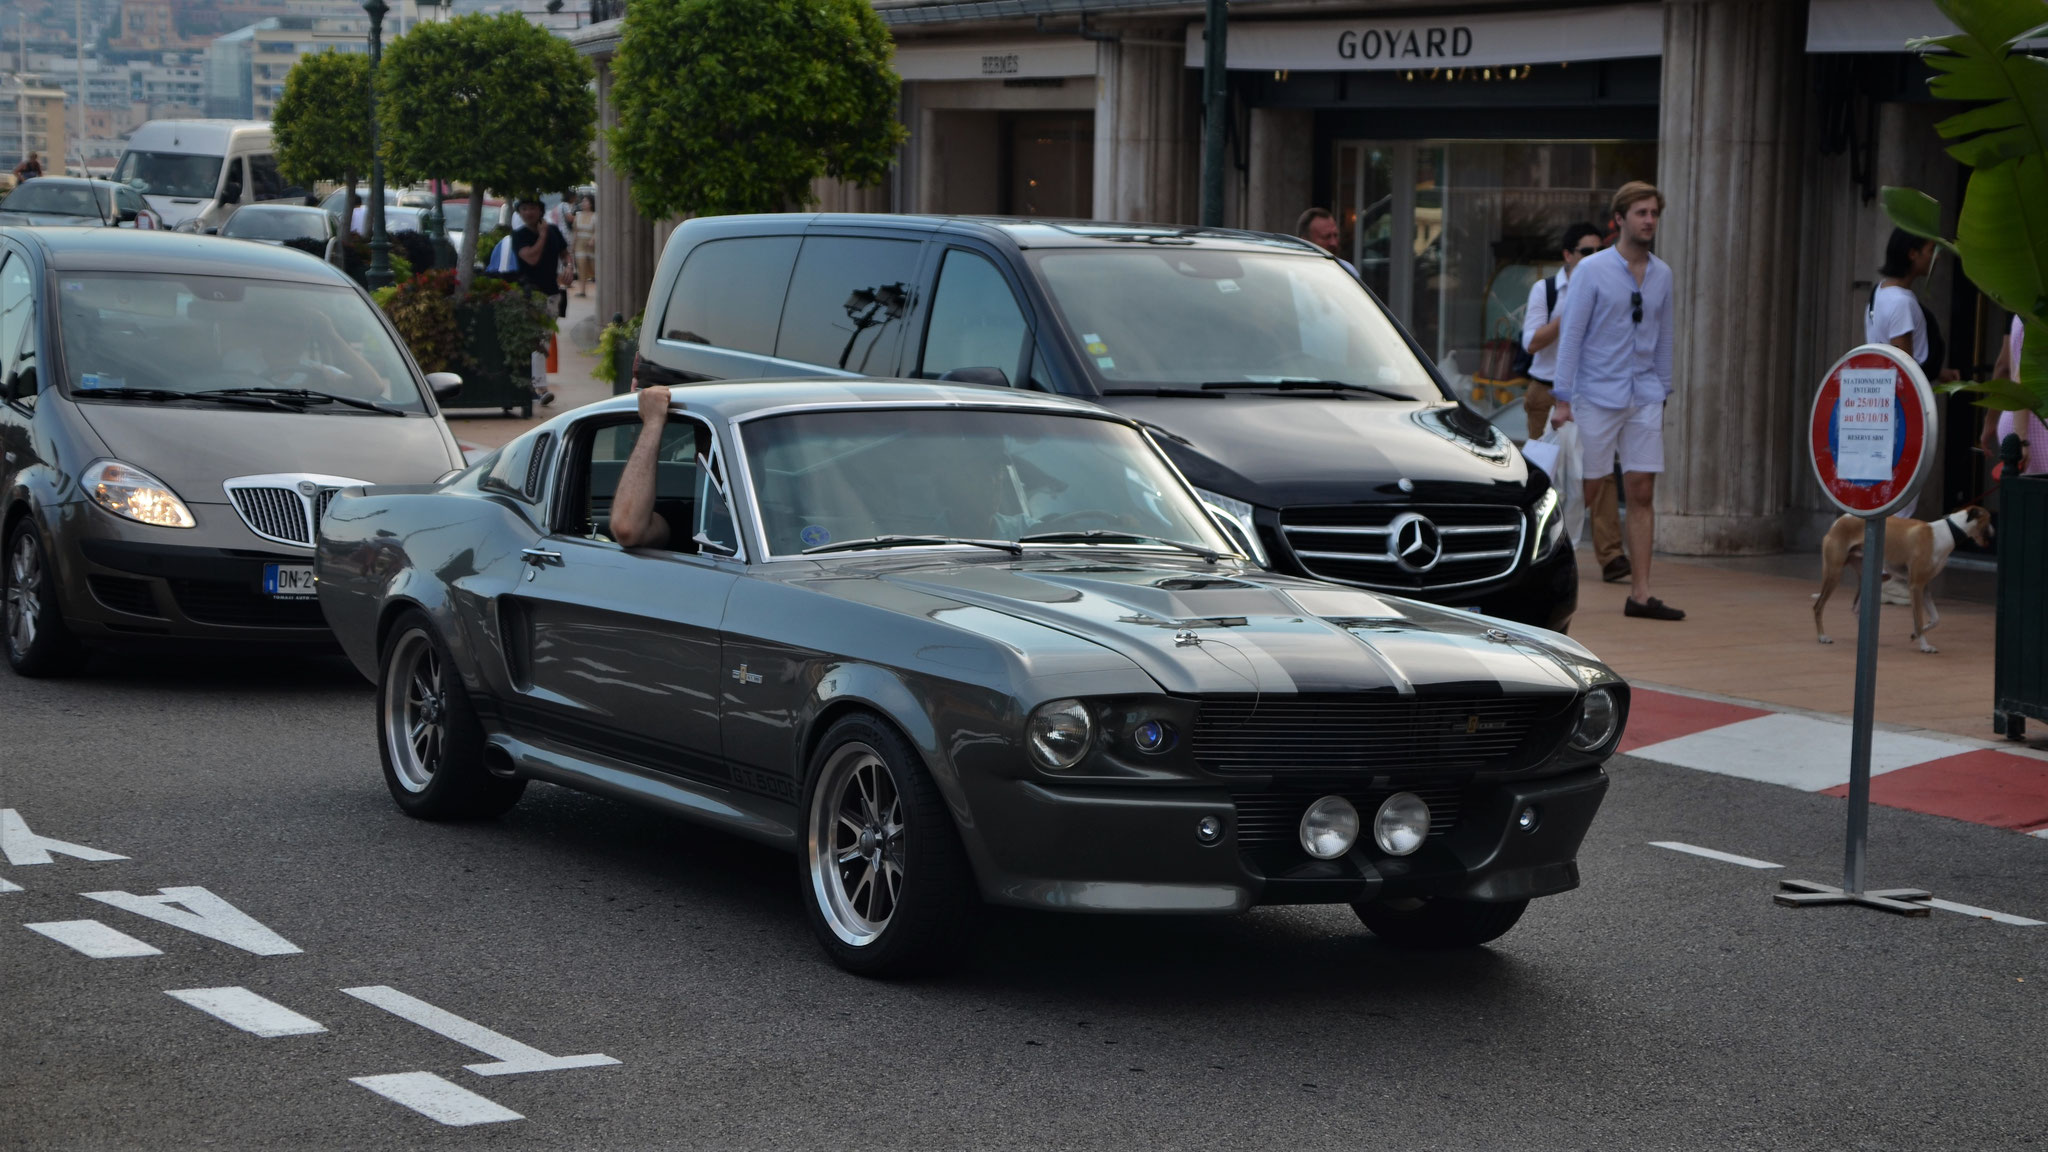 Mustang Shelby G.T. 500